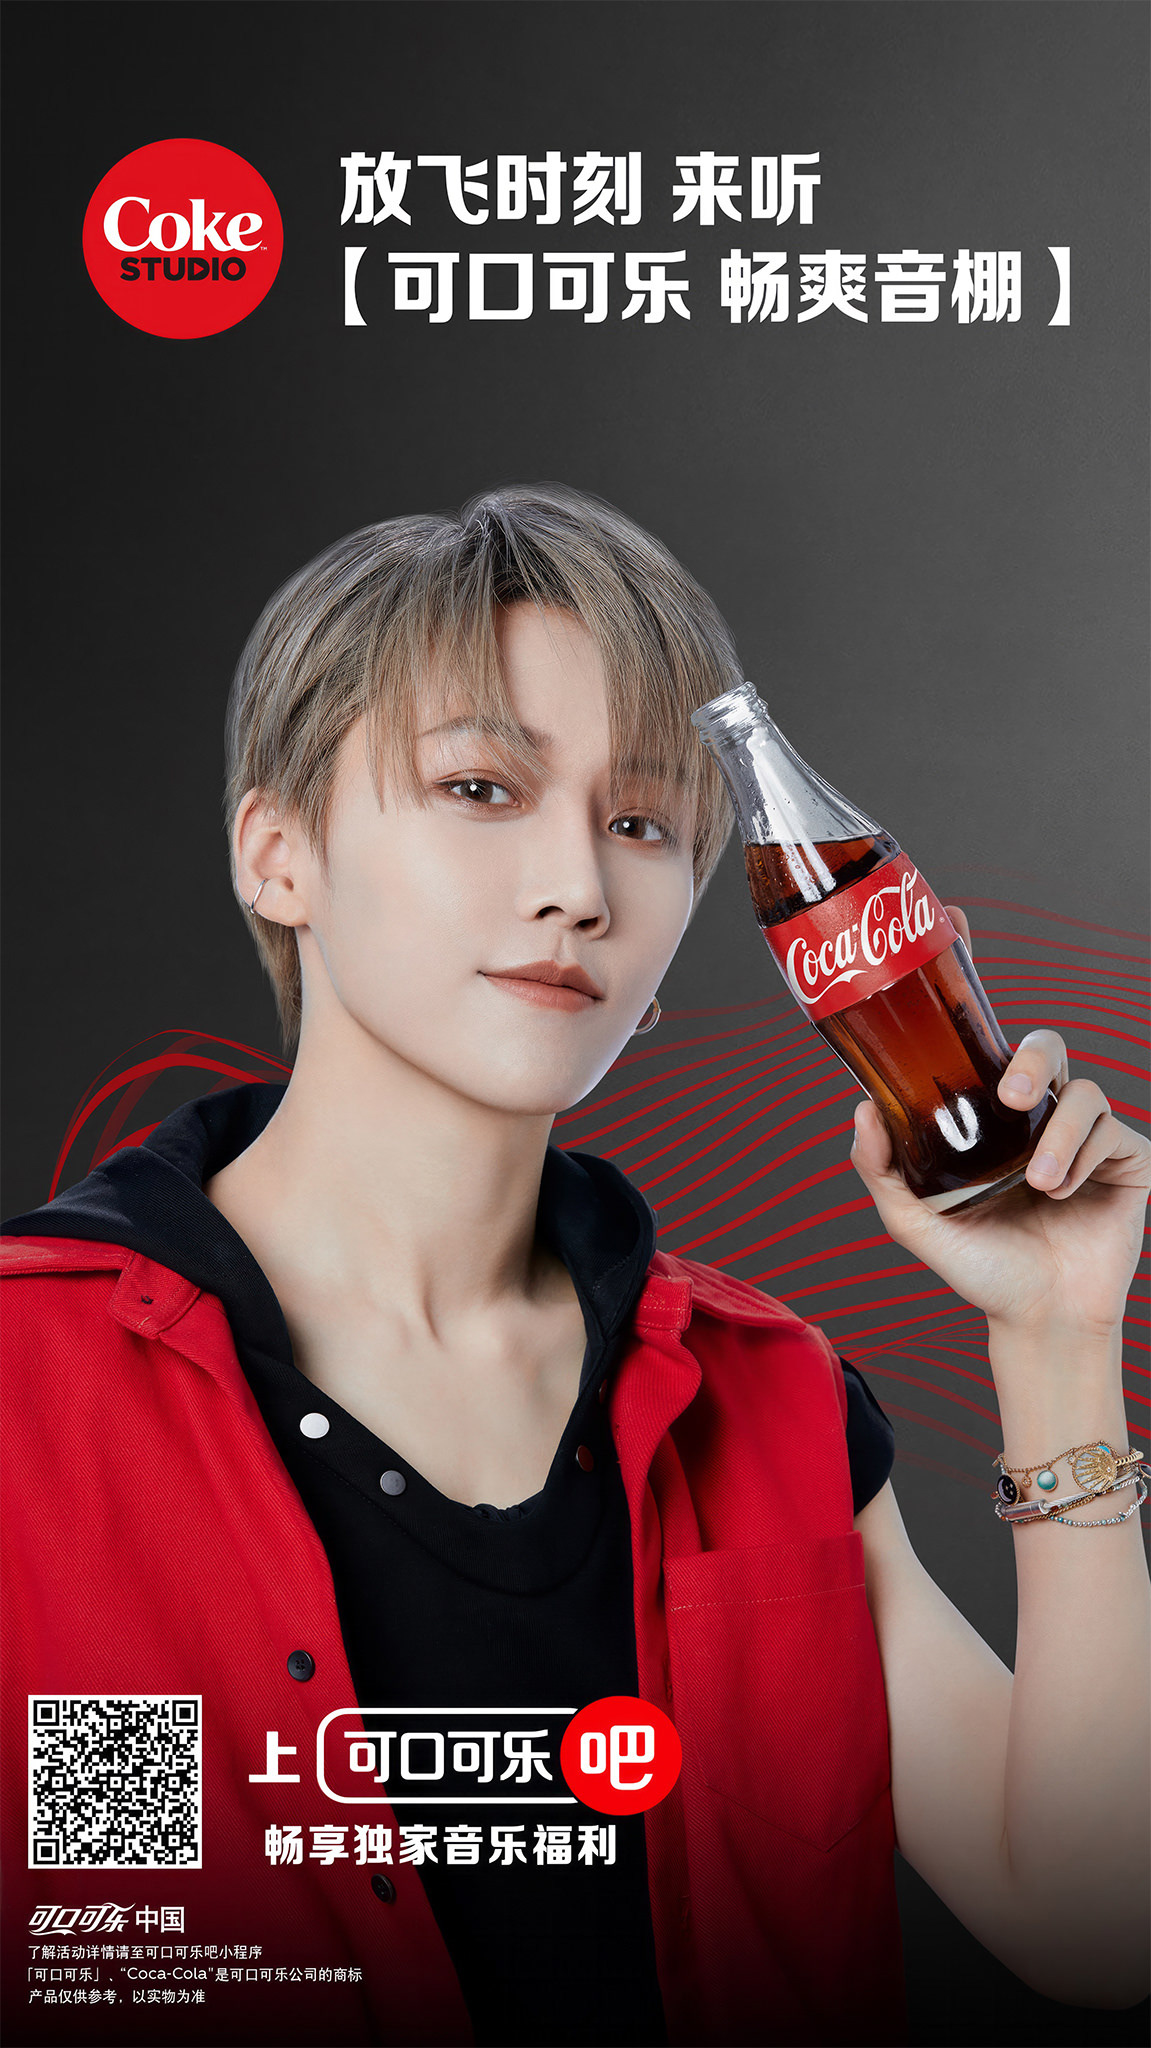 Liu Xin posing with a Coca-Cola bottle  the 'Tik Boom' music video, directed by Olivier Hero Dressen